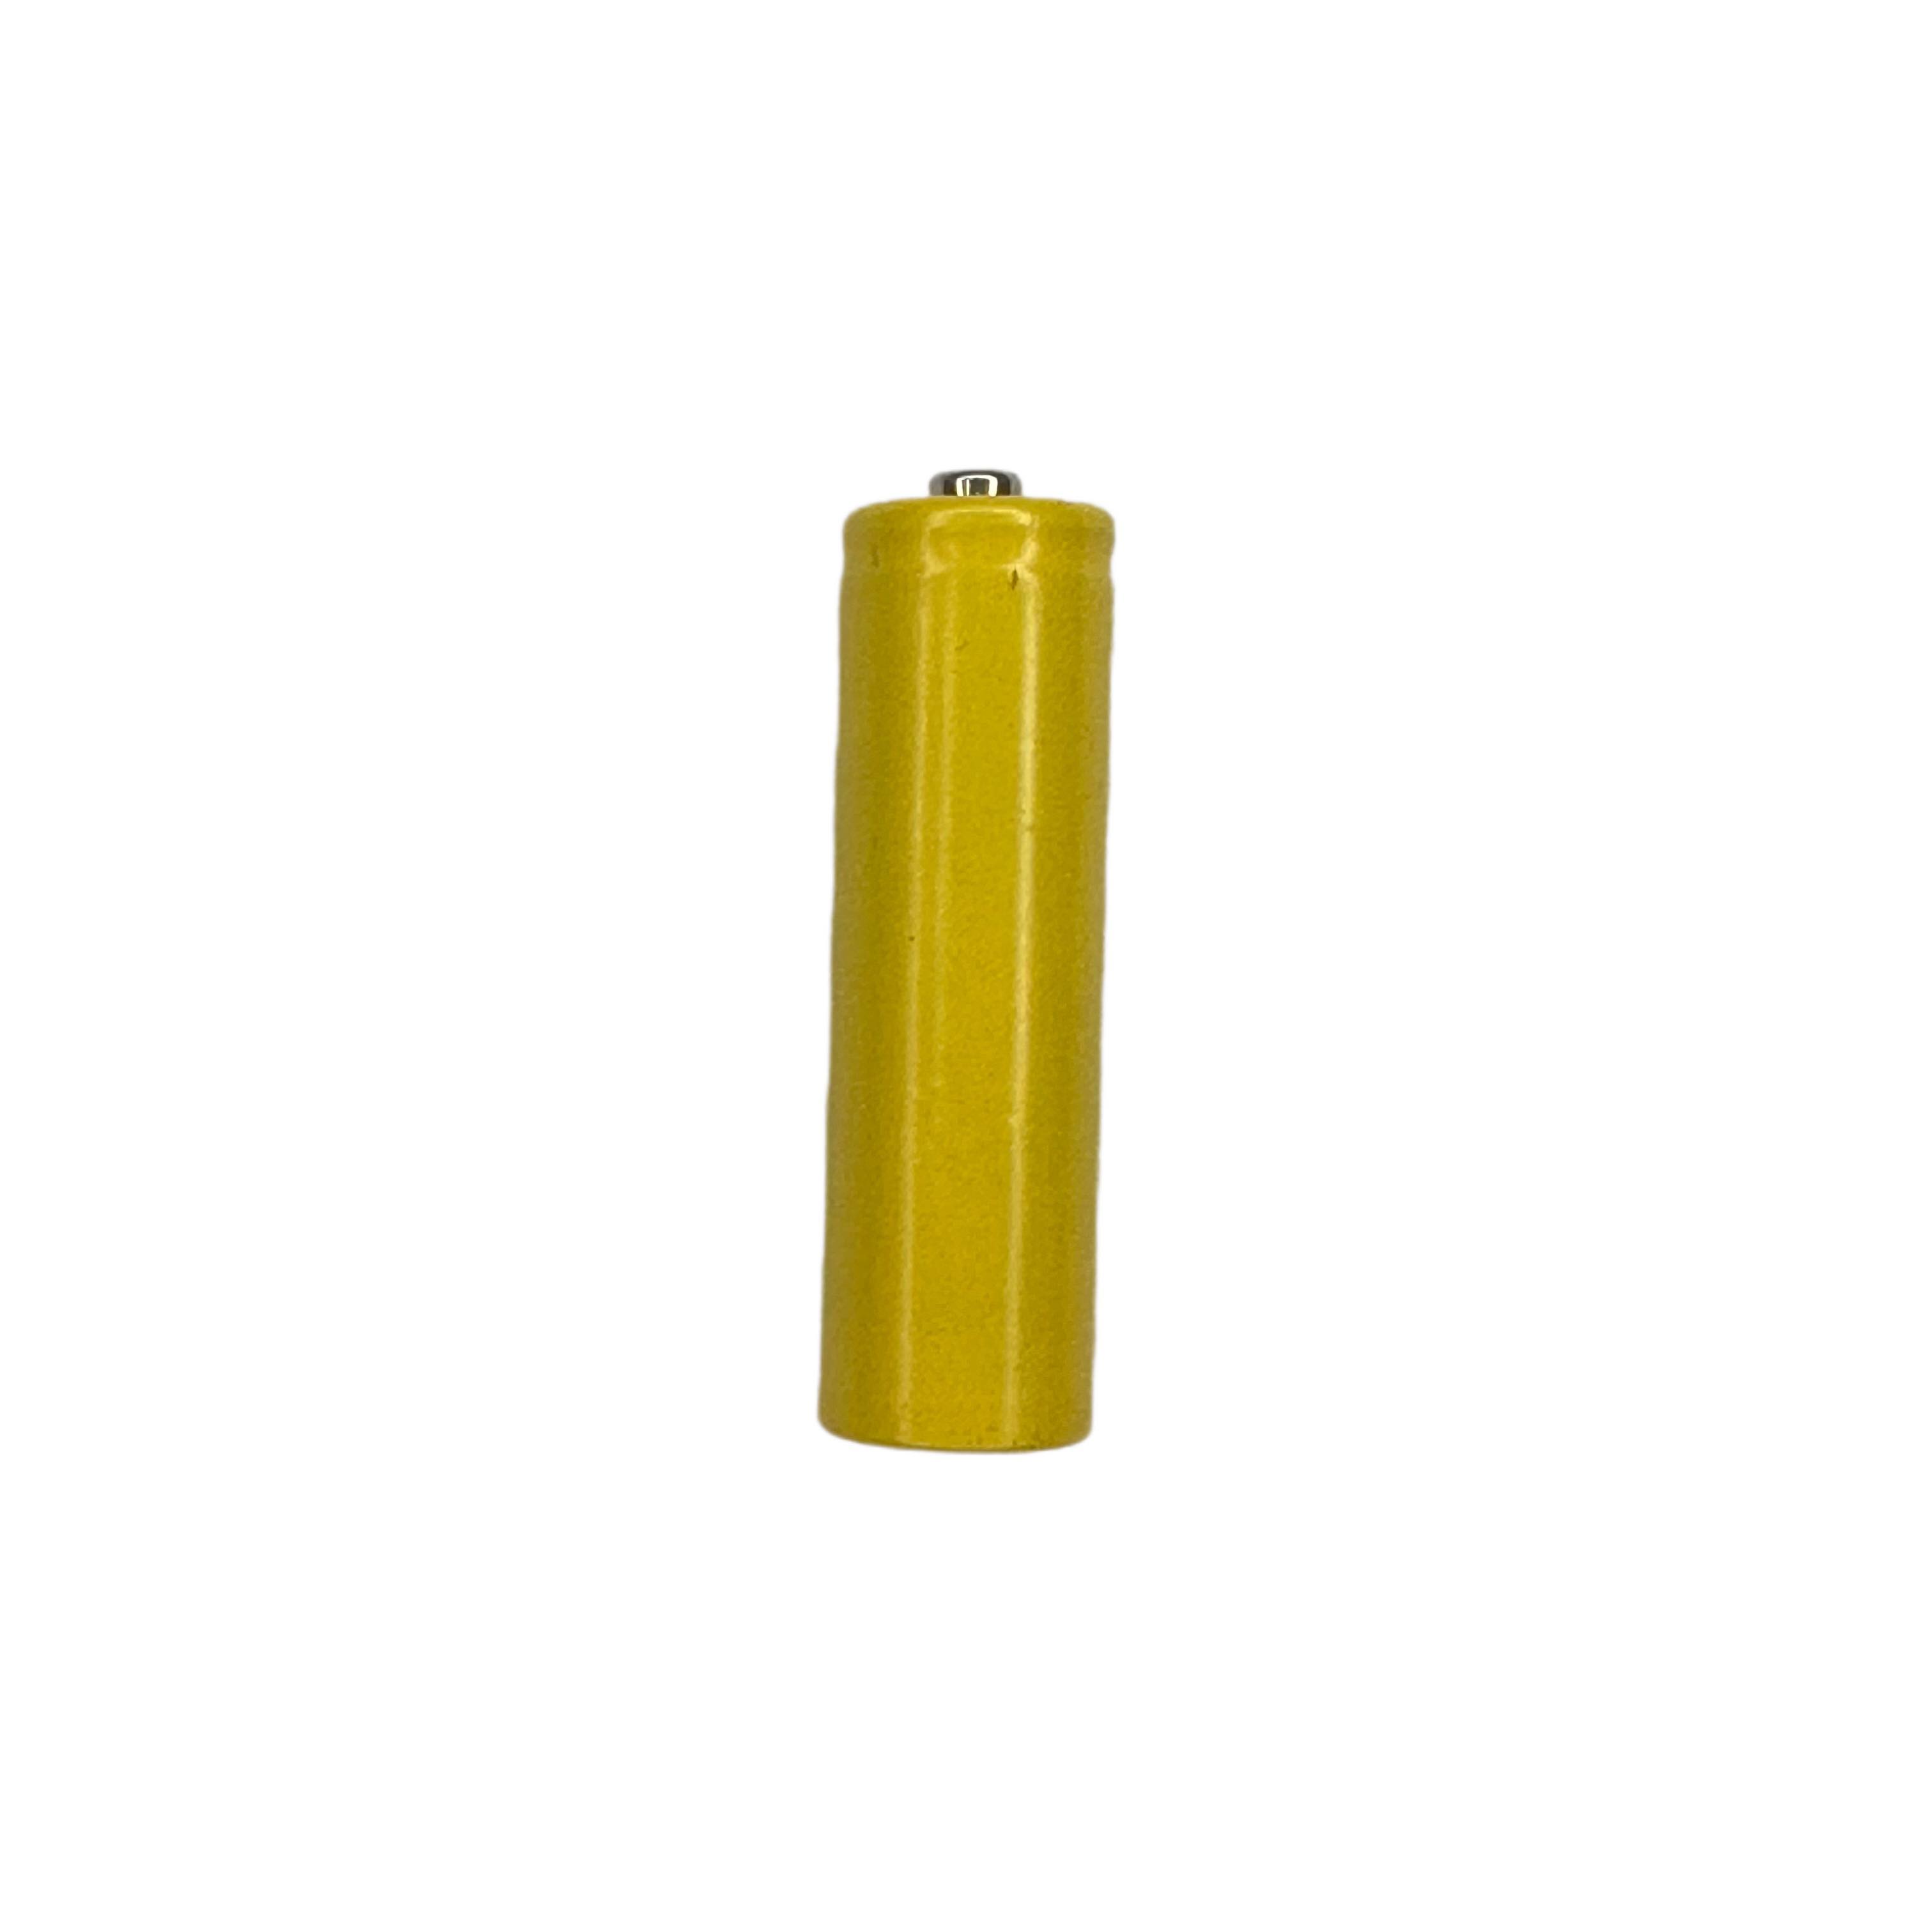 Dummy AA Cell Battery